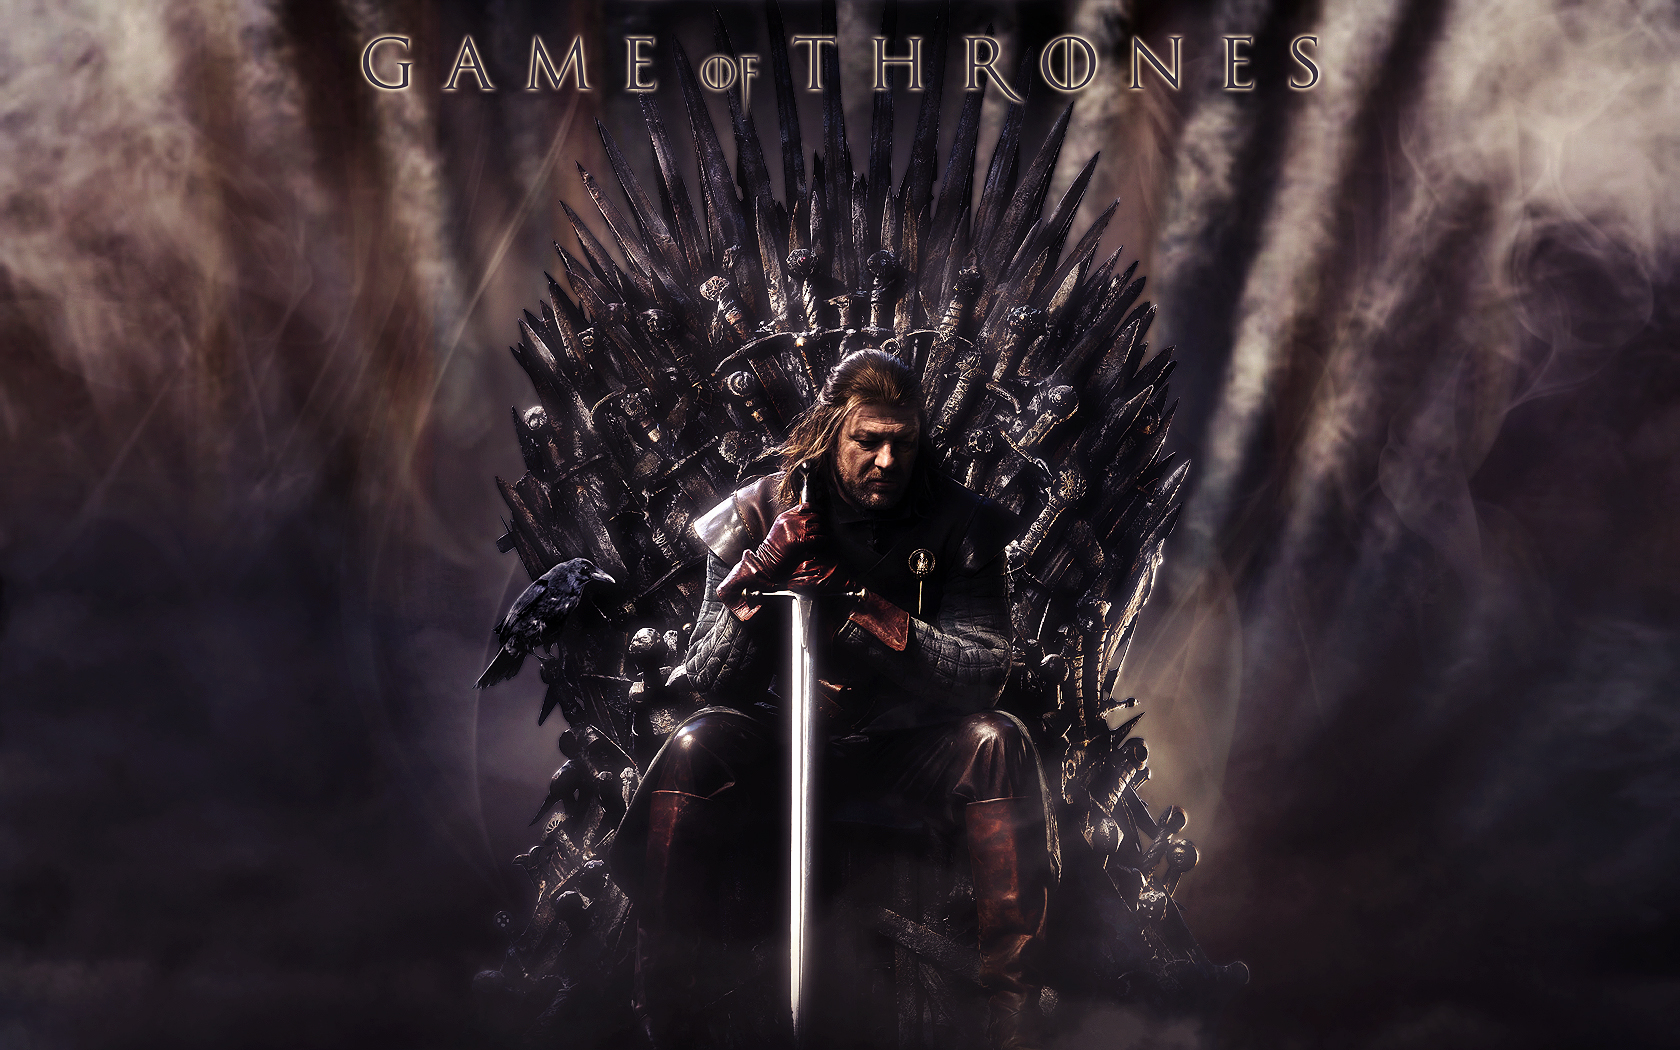 http://rozup.ir/up/gameofthrones/Pictures/wallpaper/game_of_thrones_wallpaper_by_en_taiho_d3bjxo7.jpg?w=600